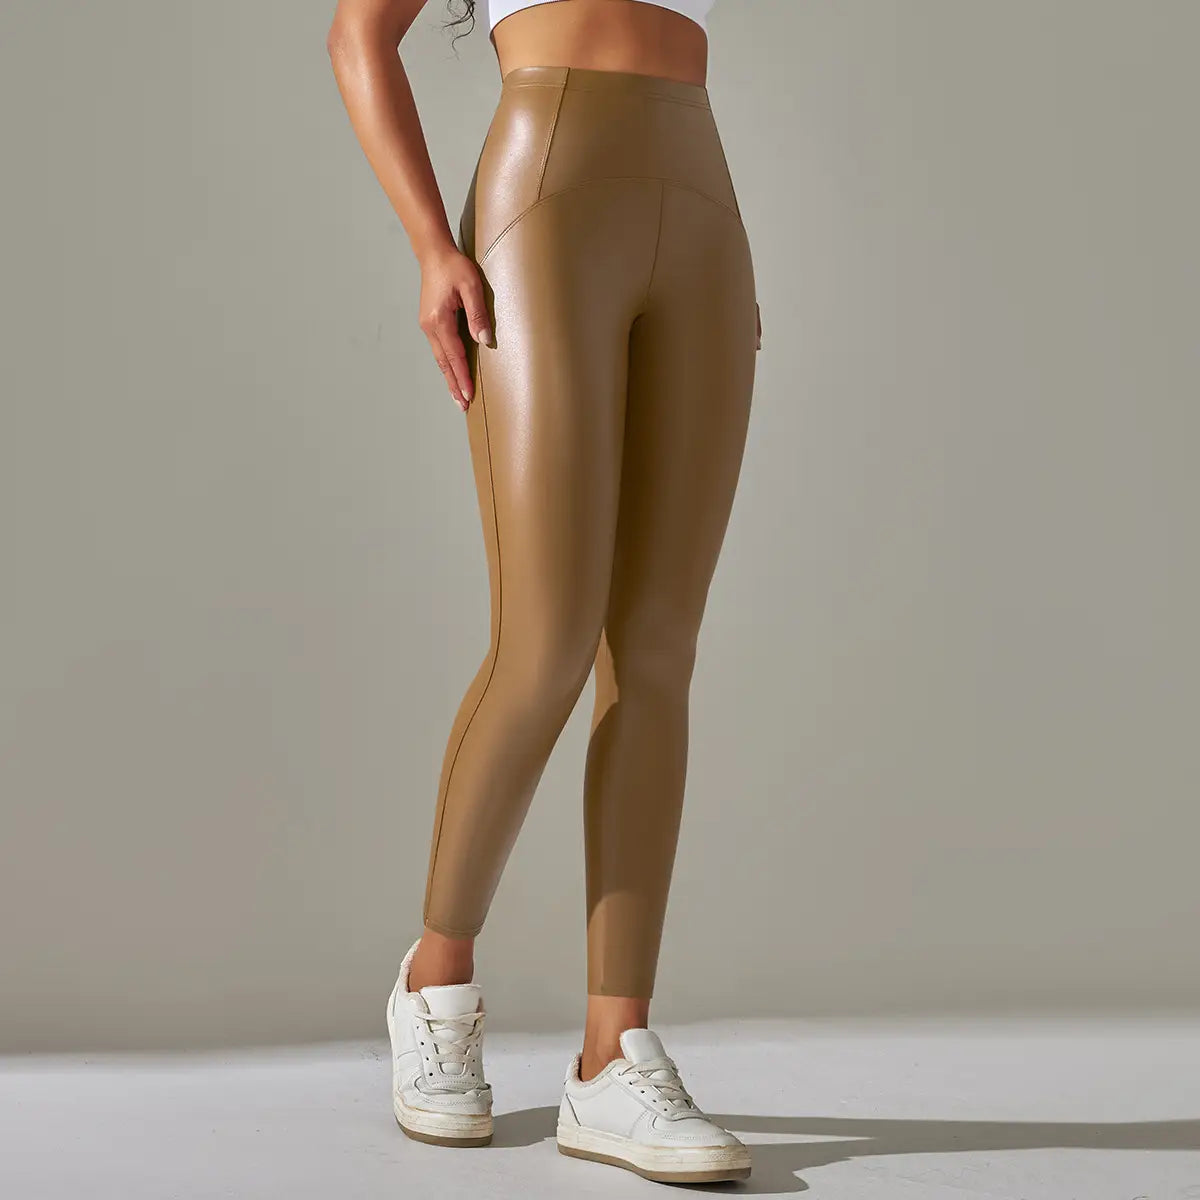 Faux Leather Leggings - High Elastic, Sporty Chic